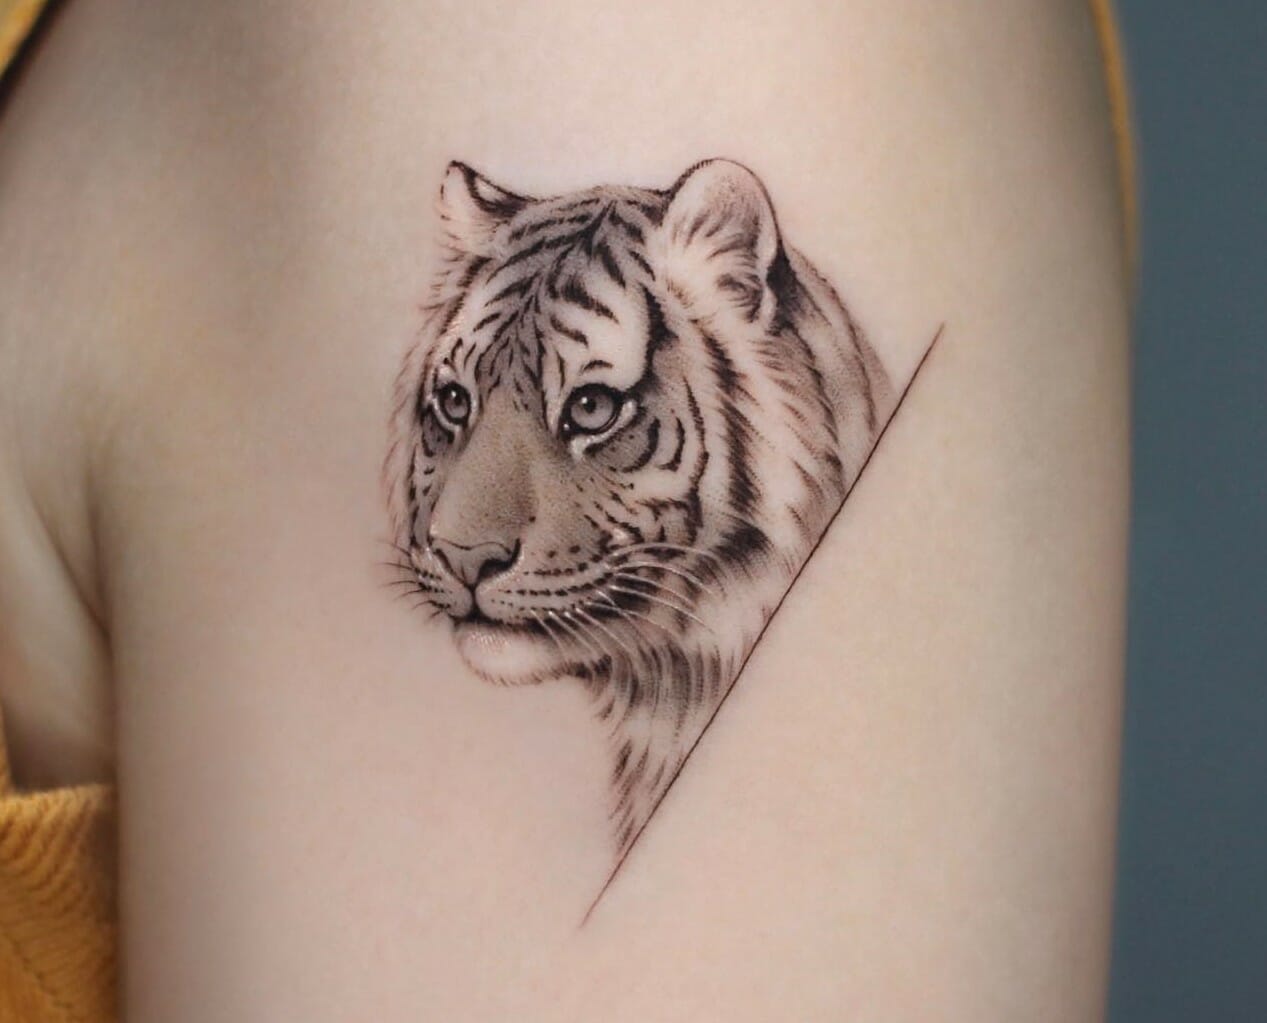 TIGER TATTOOS AND THEIR MEANINGS. 5 MIN READ | by Jhaiho | Medium